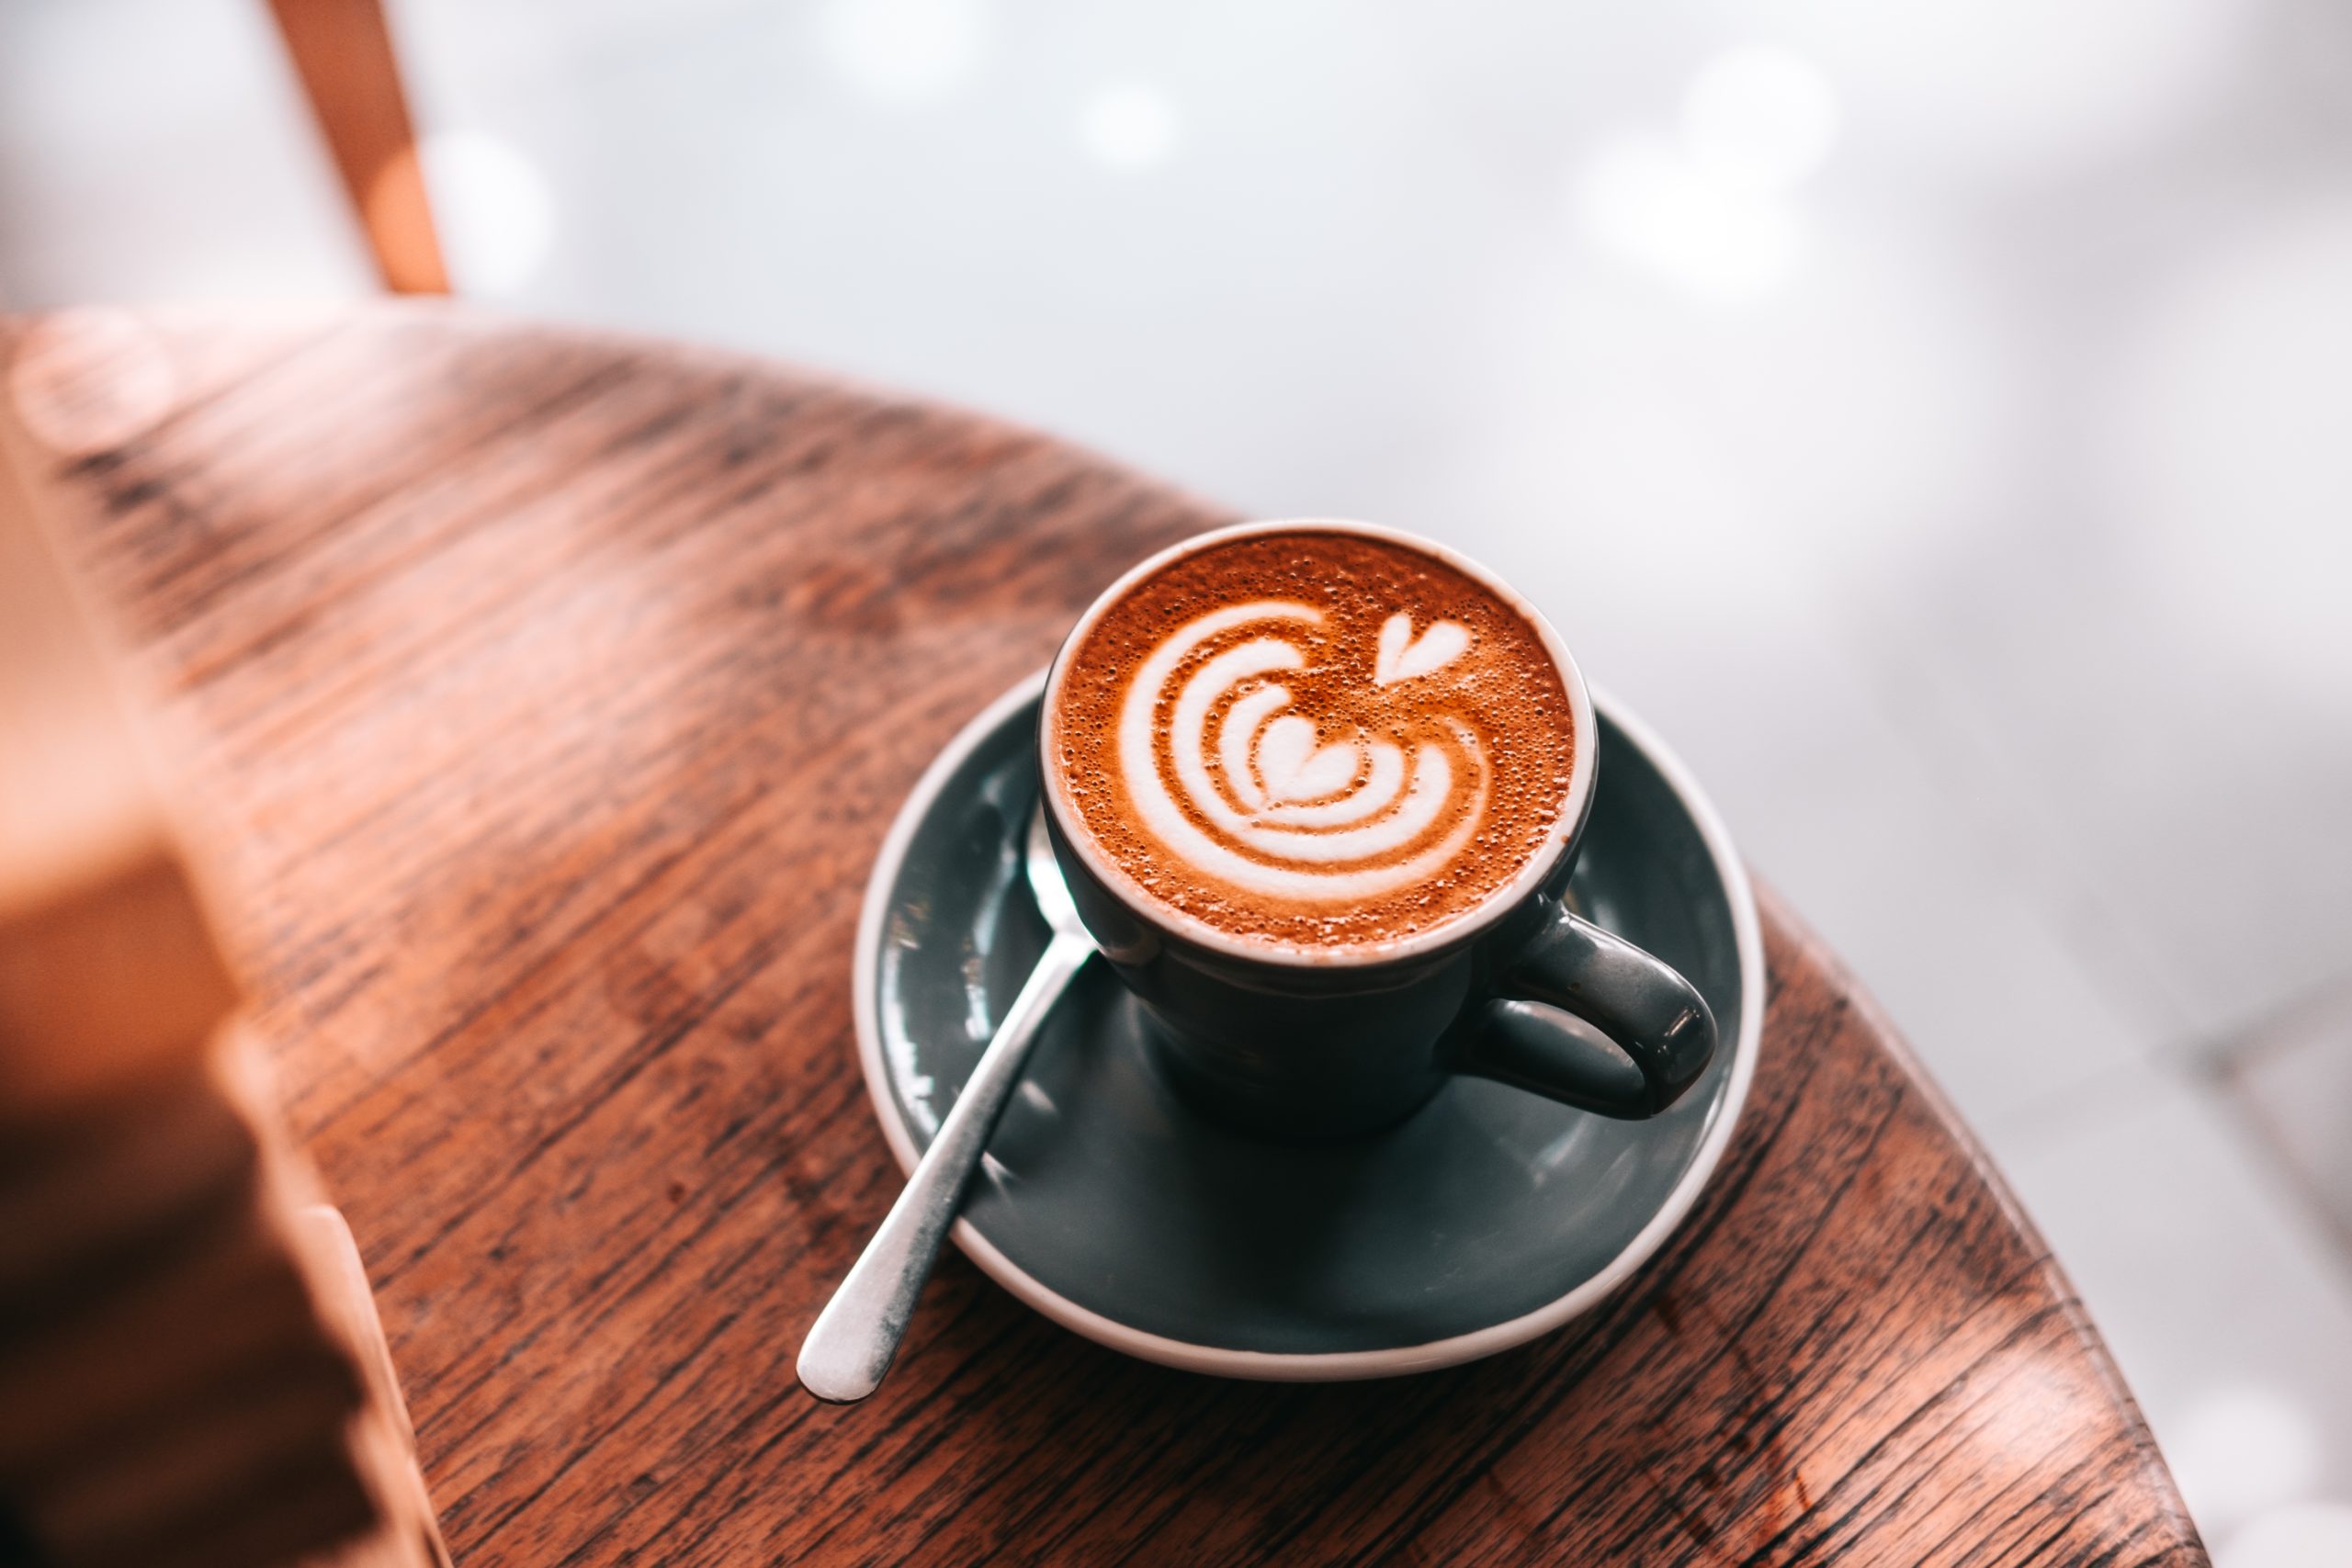 Flat White Coffee Market 2020 Size, Growth, Trends, Share And 2025 Forecast Report – …